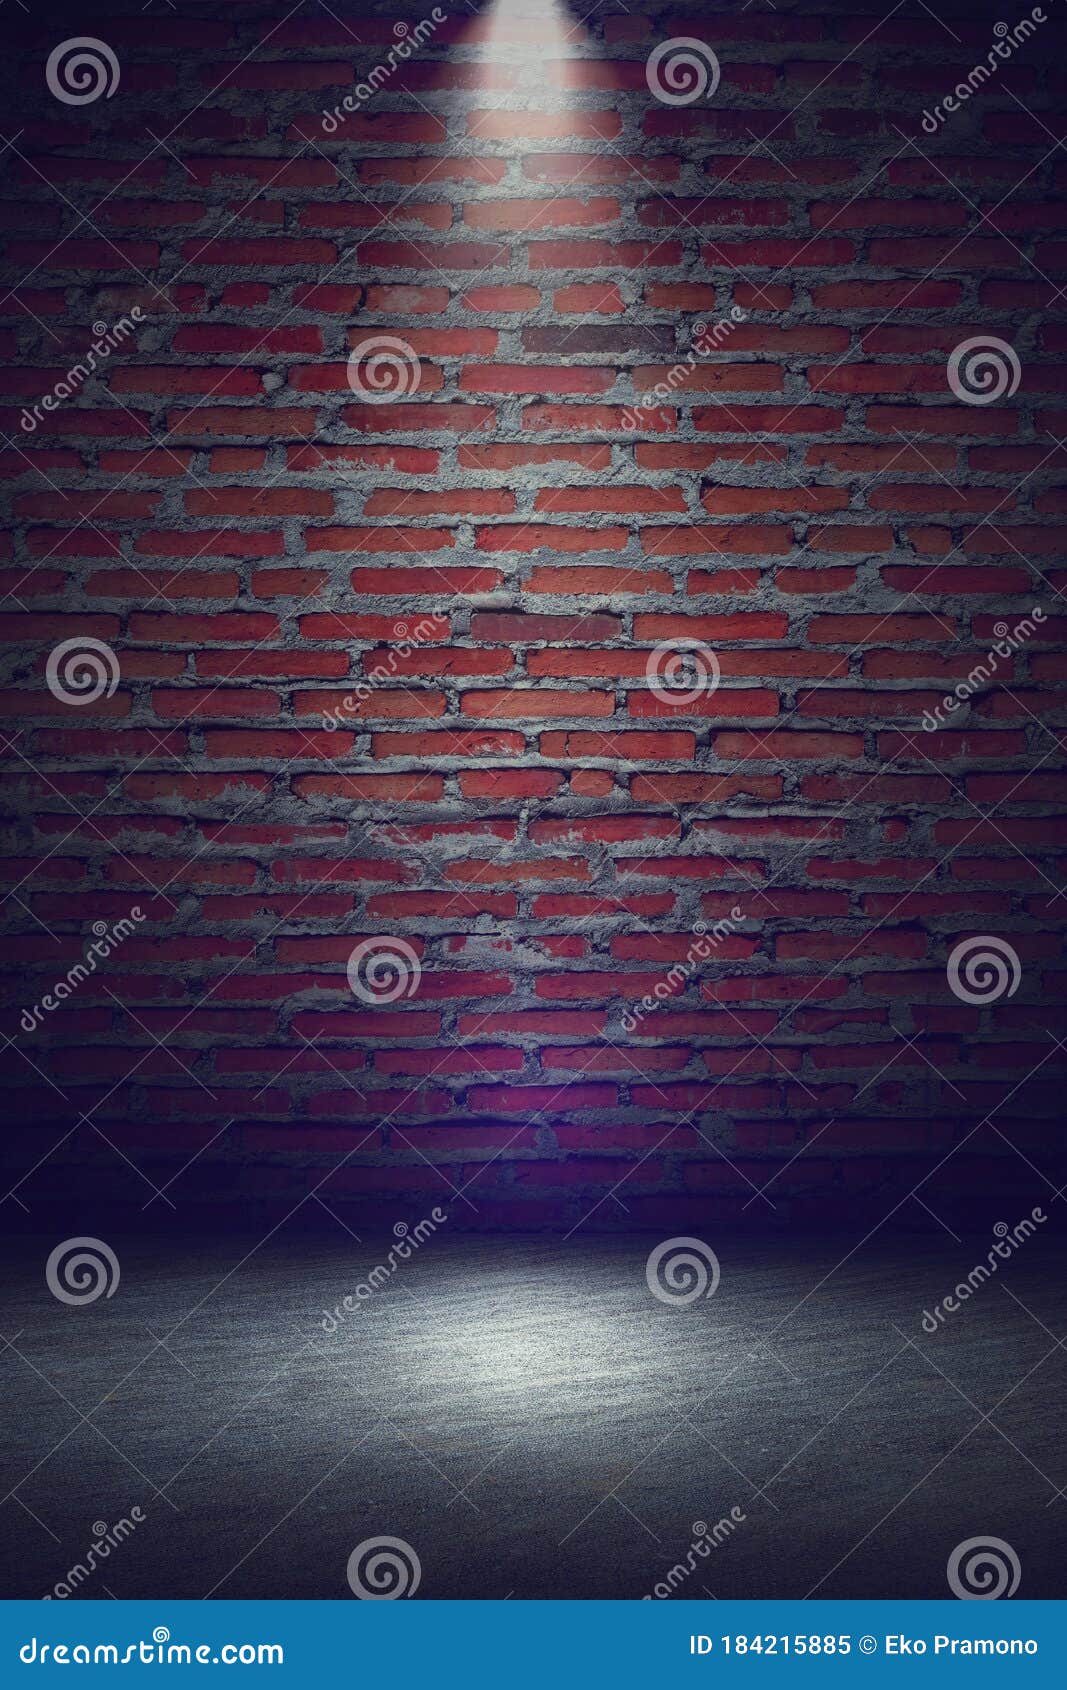 Tile Floor and Brick Wall Background with Lights at Night. HD Image and  Large Resolution Stock Image - Image of dark, hard: 184215885